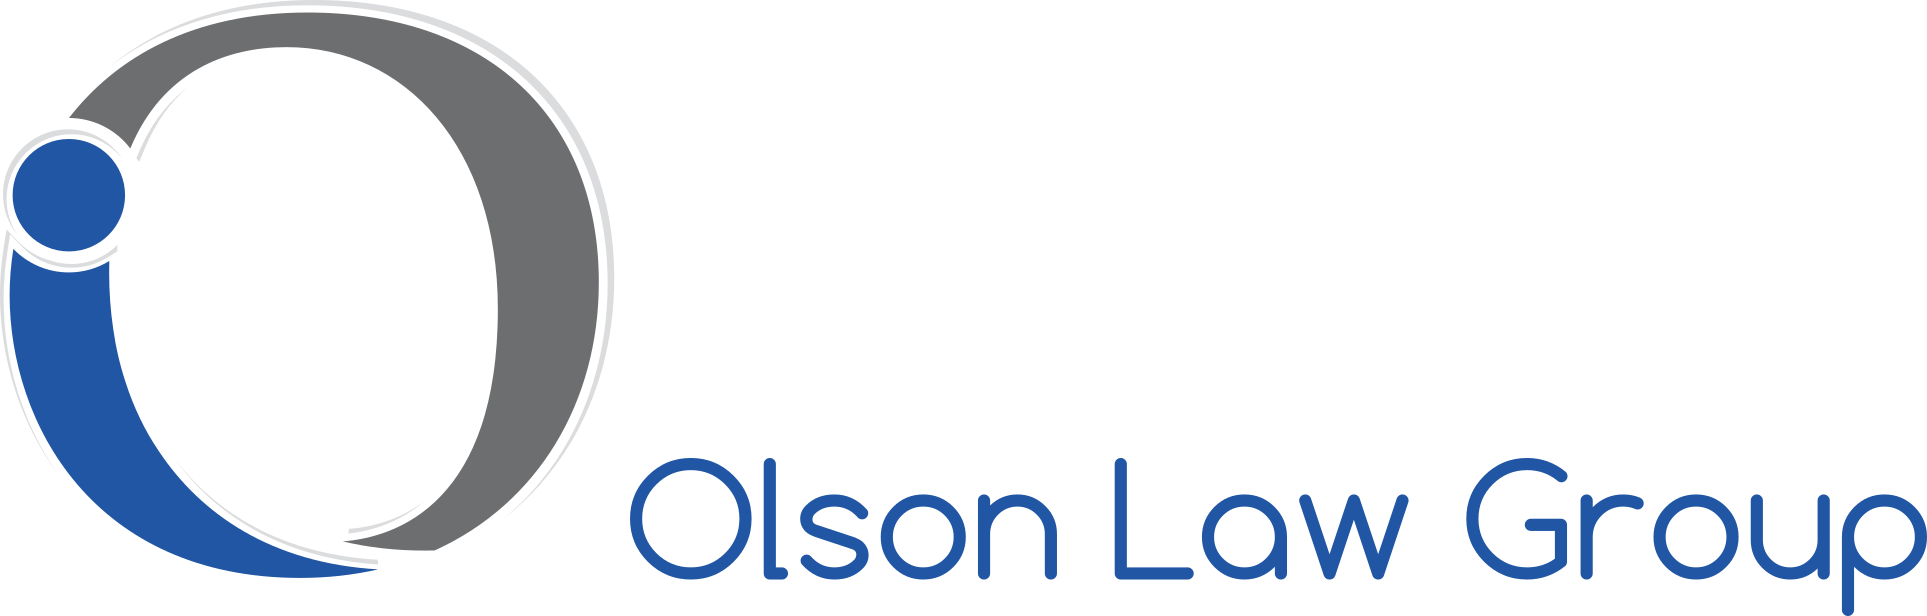 Olson Law Group | Corporate, Real Estate and Wills &amp; Estates lawyer | Calgary, Okotoks and High River AB